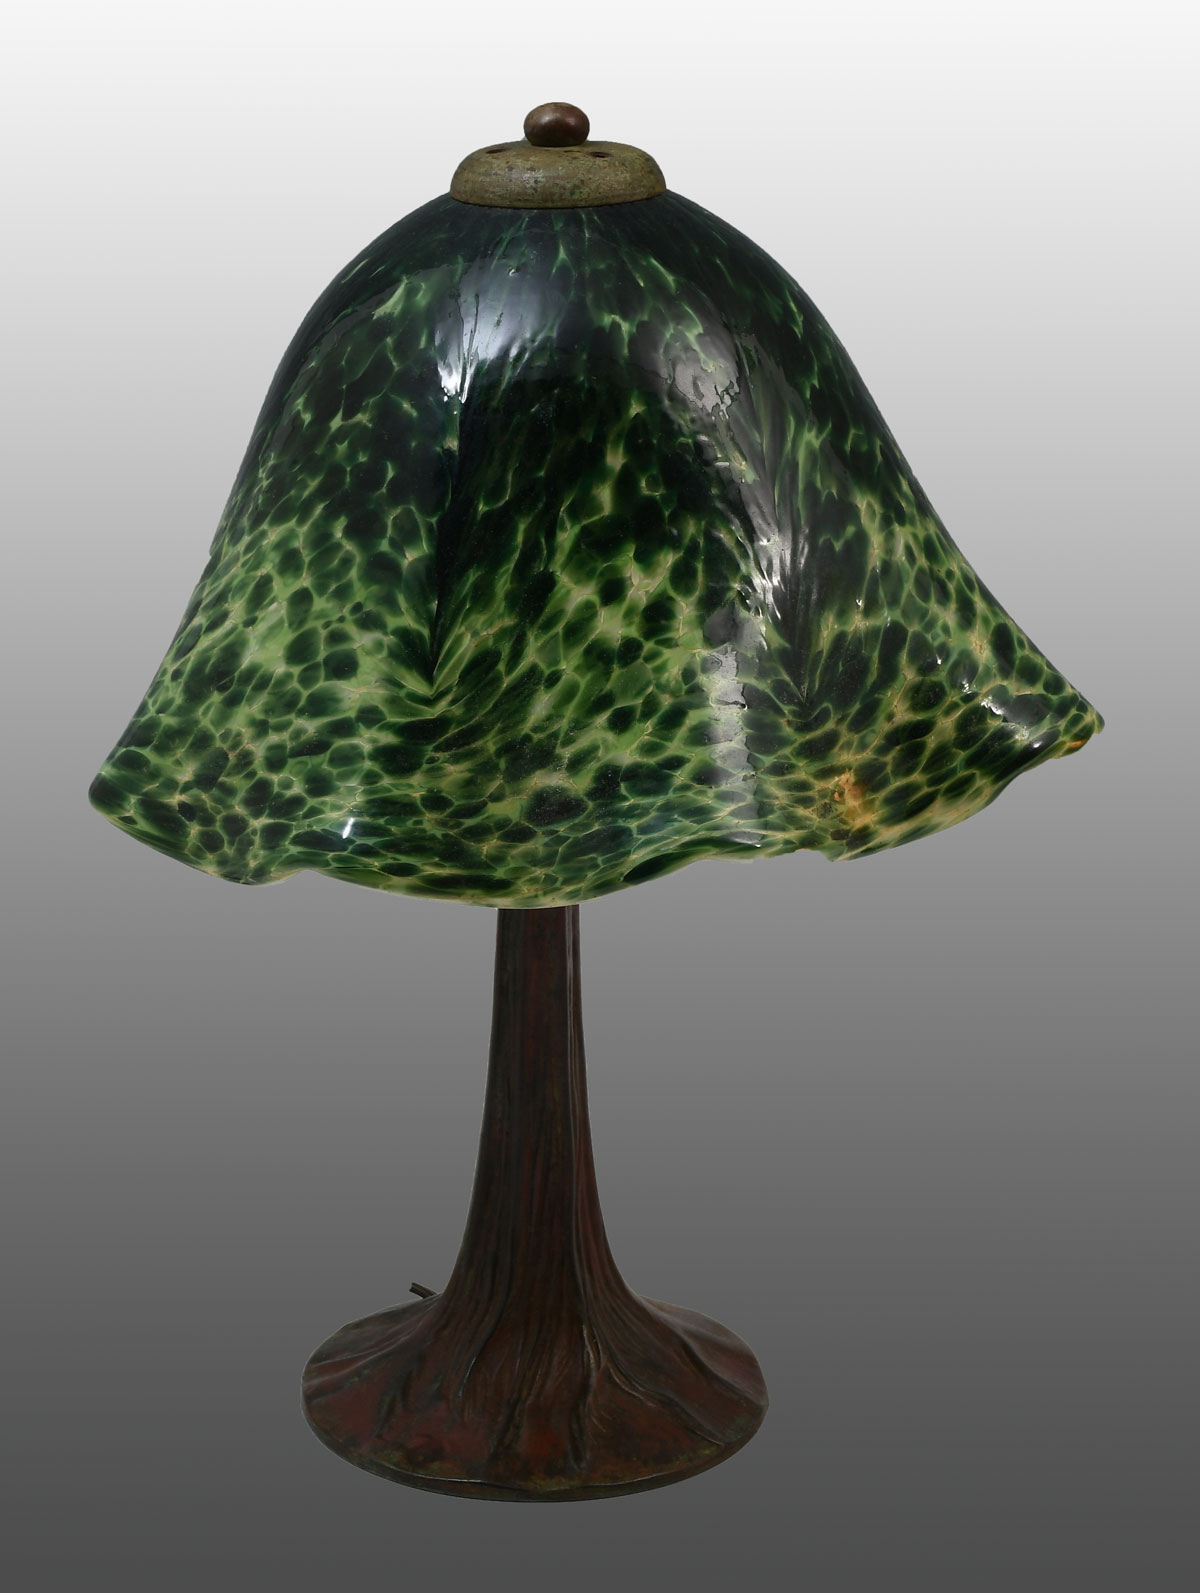 TREE FORM GLASS SHADE TABLE LAMP: